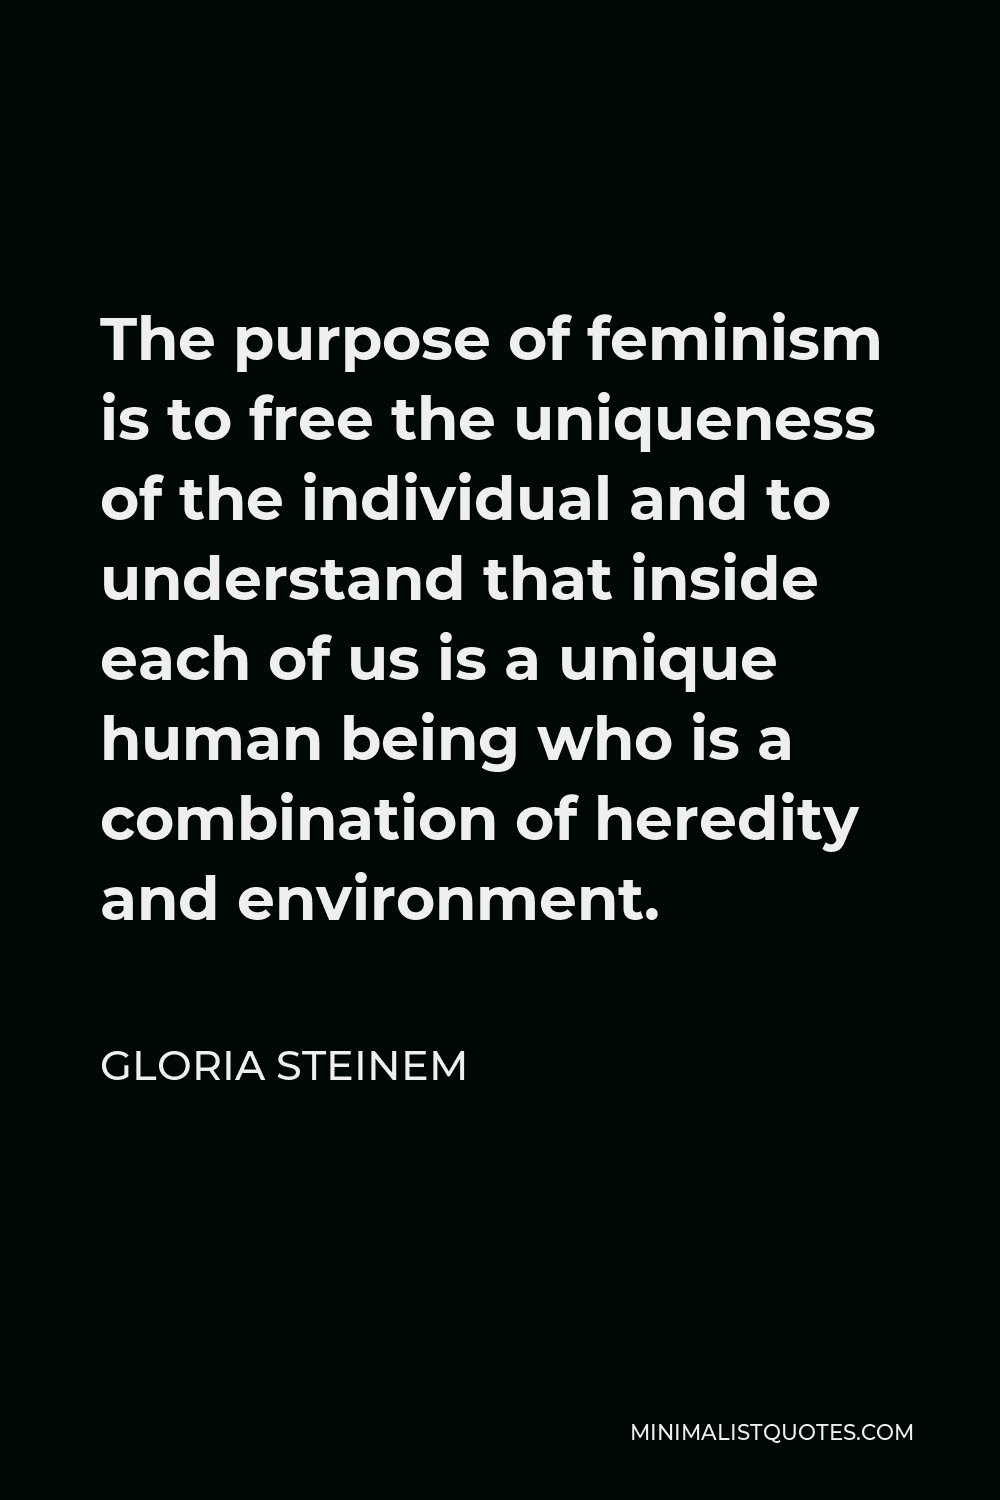 Gloria Steinem Quote - The purpose of feminism is to free the uniqueness of the individual and to understand that inside each of us is a unique human being who is a combination of heredity and environment.